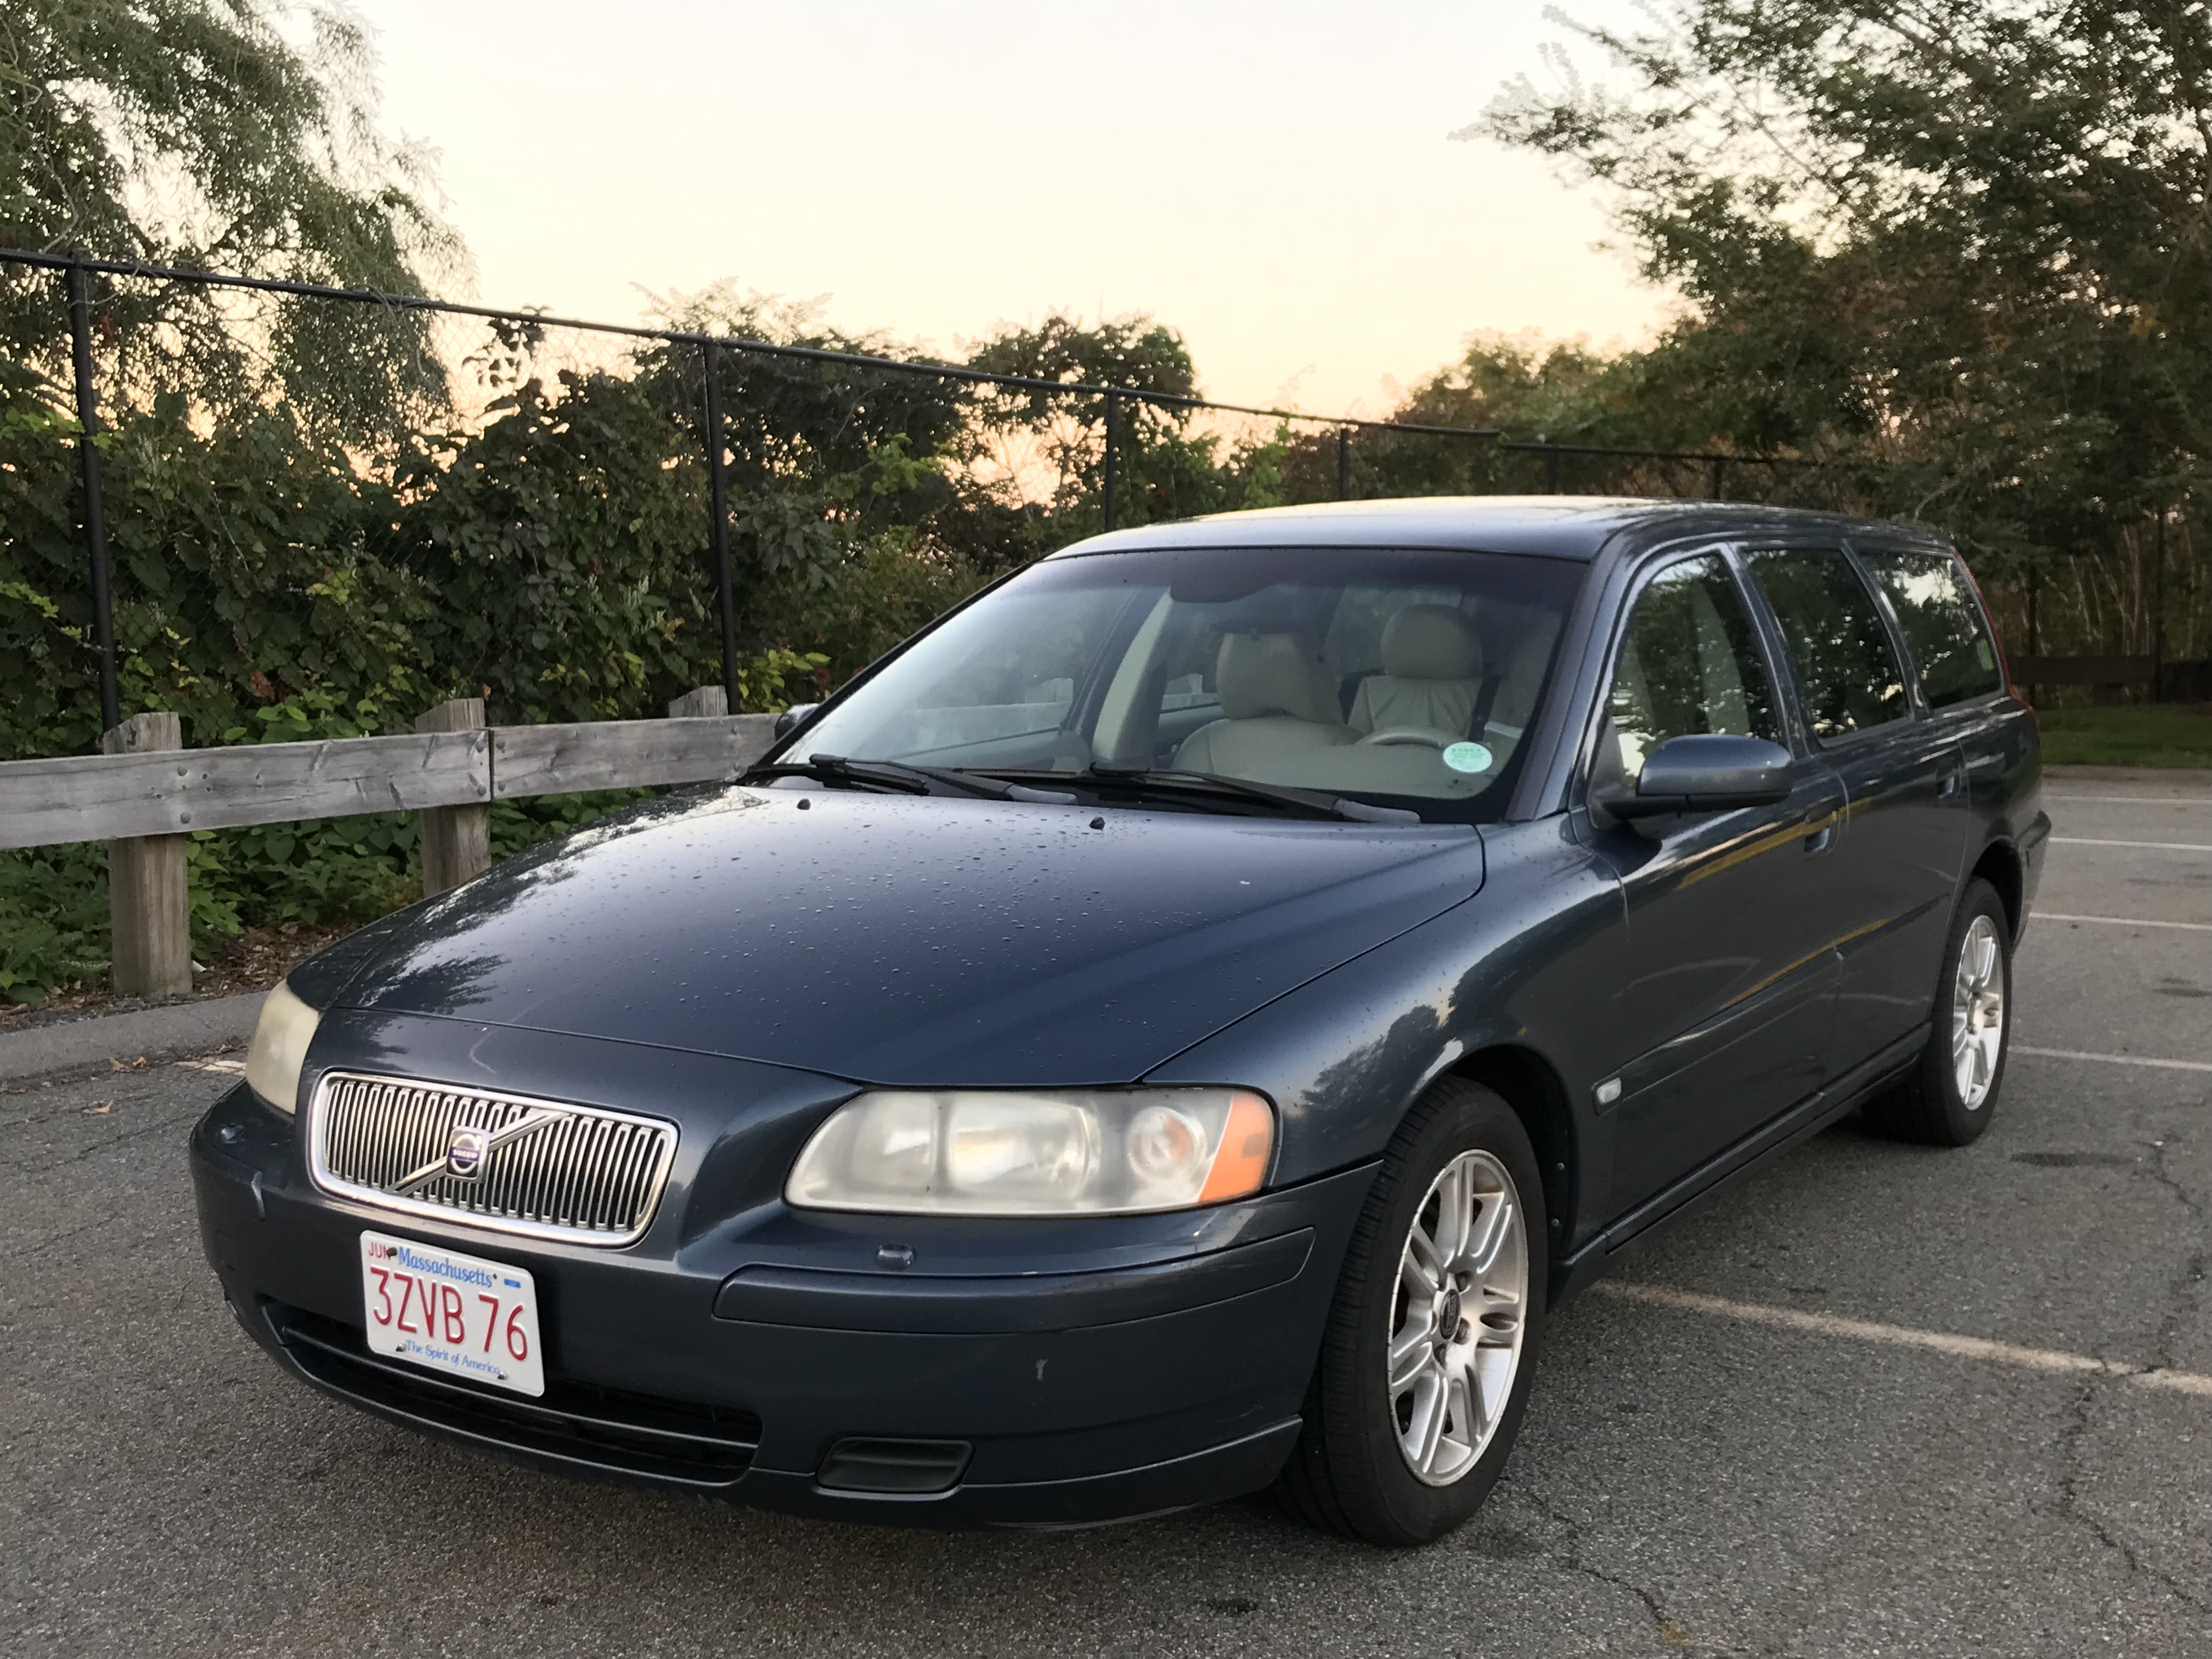 Used Volvo Cars for Sale in Chittenden, VT Under $5,000